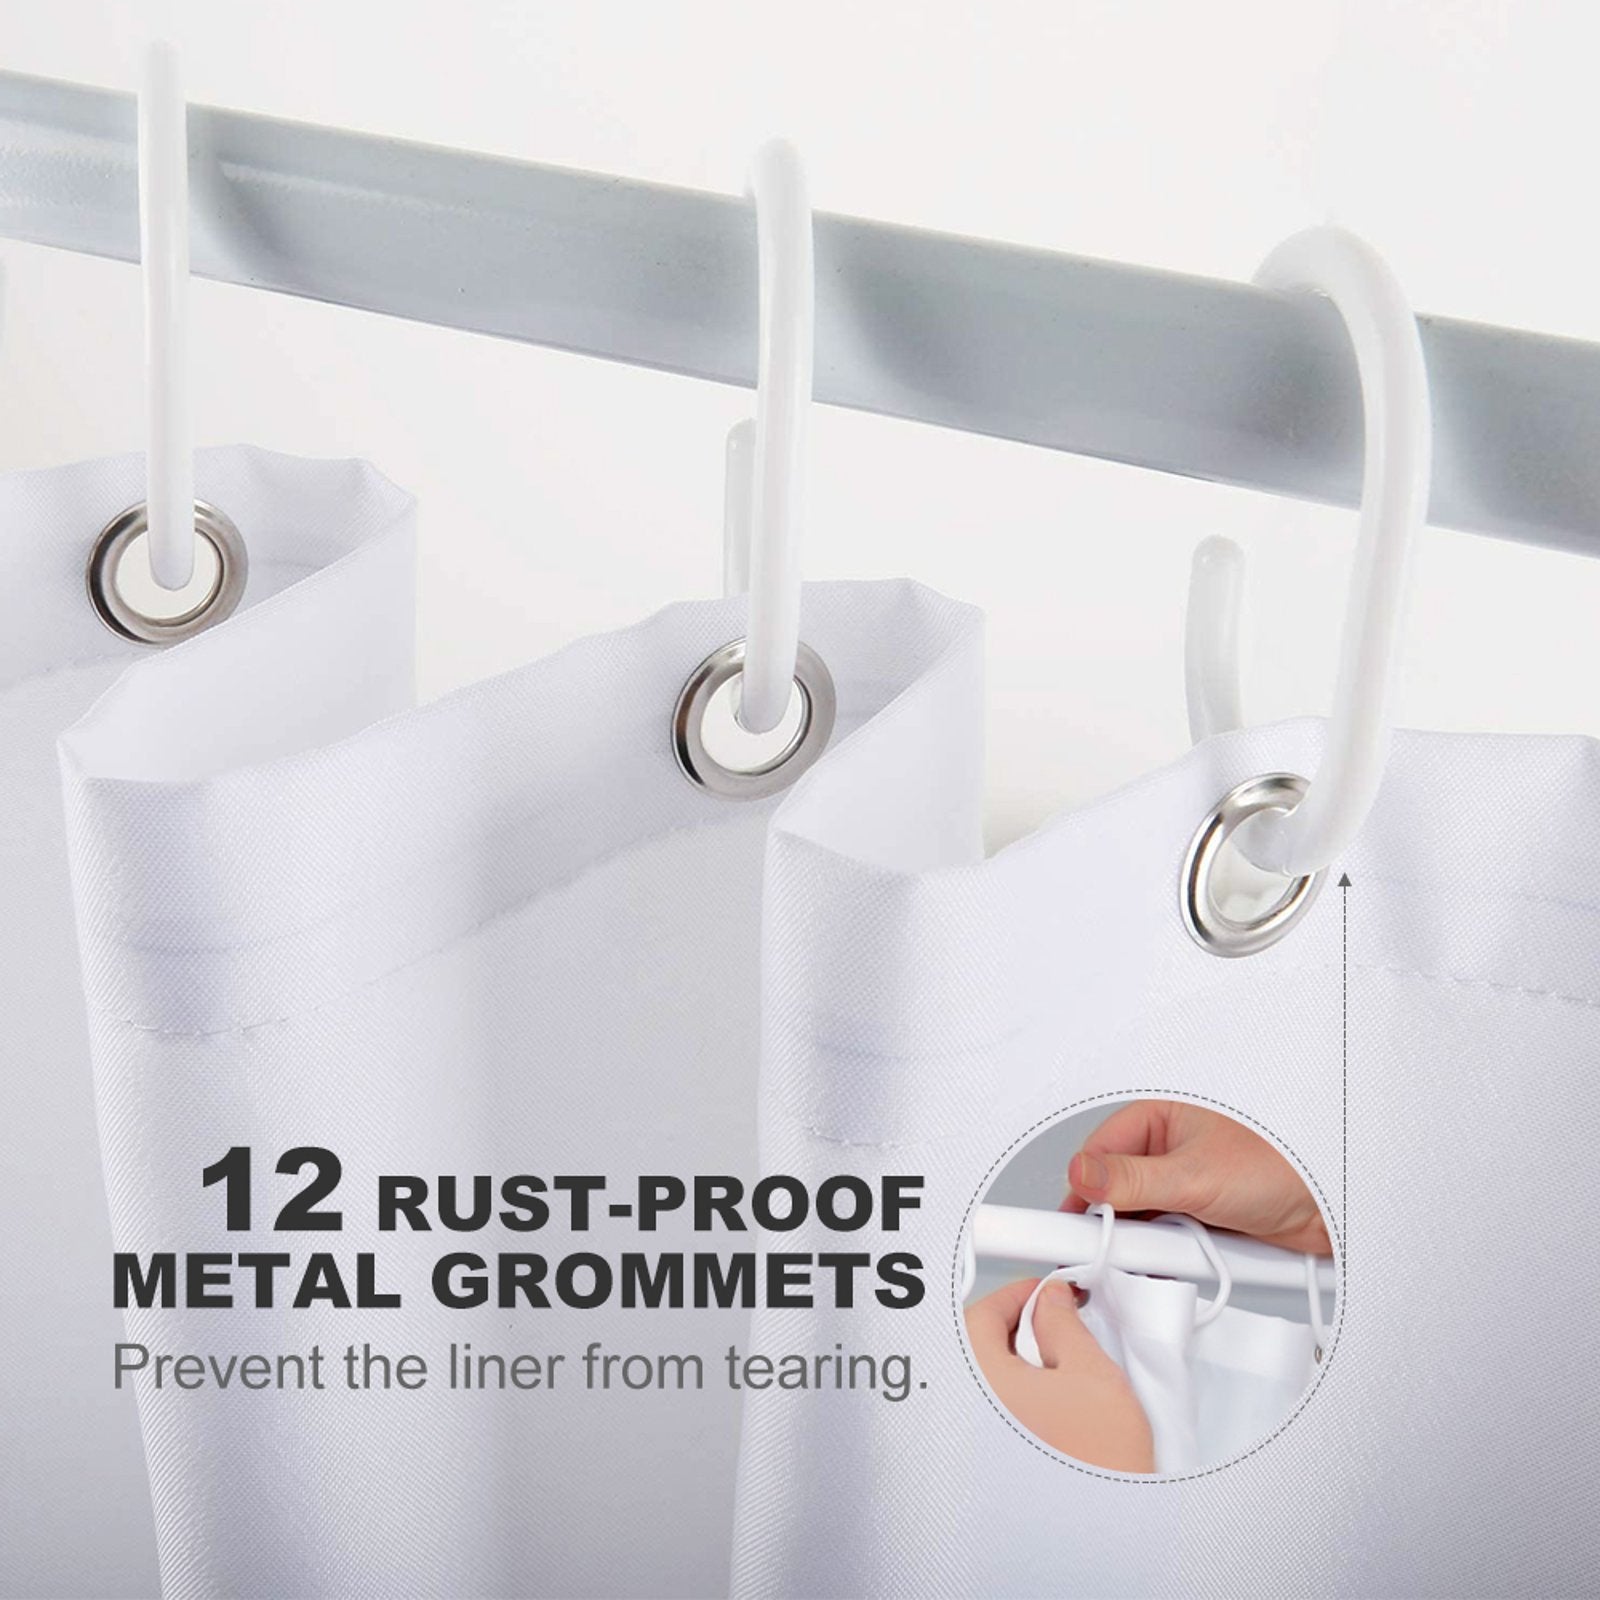 Close-up of a white shower curtain with text overlay highlighting its 12 rust-proof metal grommets. An inset shows hands installing the waterproof Artistic Blue Elephant Shower Curtain-Cottoncat from Cotton Cat. Text reads, "12 rust-proof metal grommets. Prevent the liner from tearing.